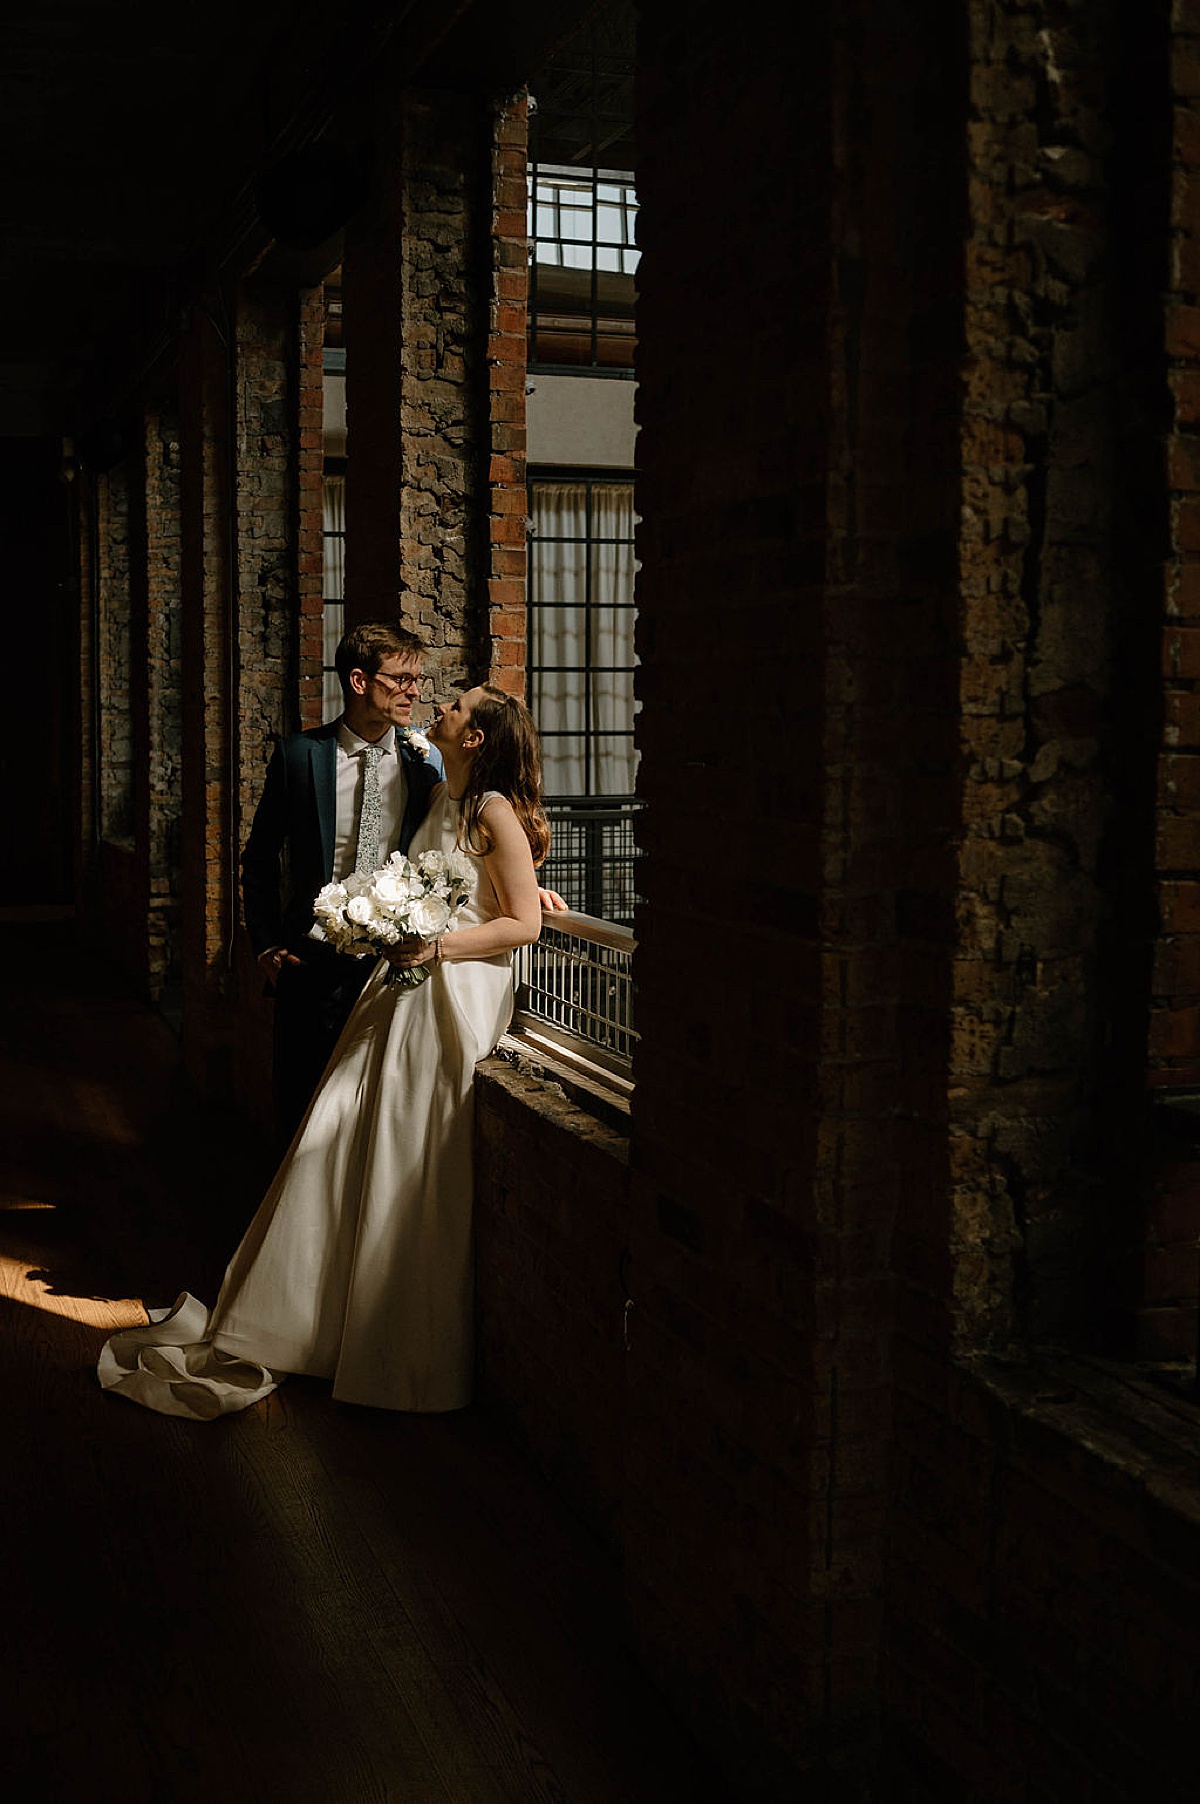 bride and groom pose in moody light from industrial window during gorgeous wedding shot by Indigo Lace Collective